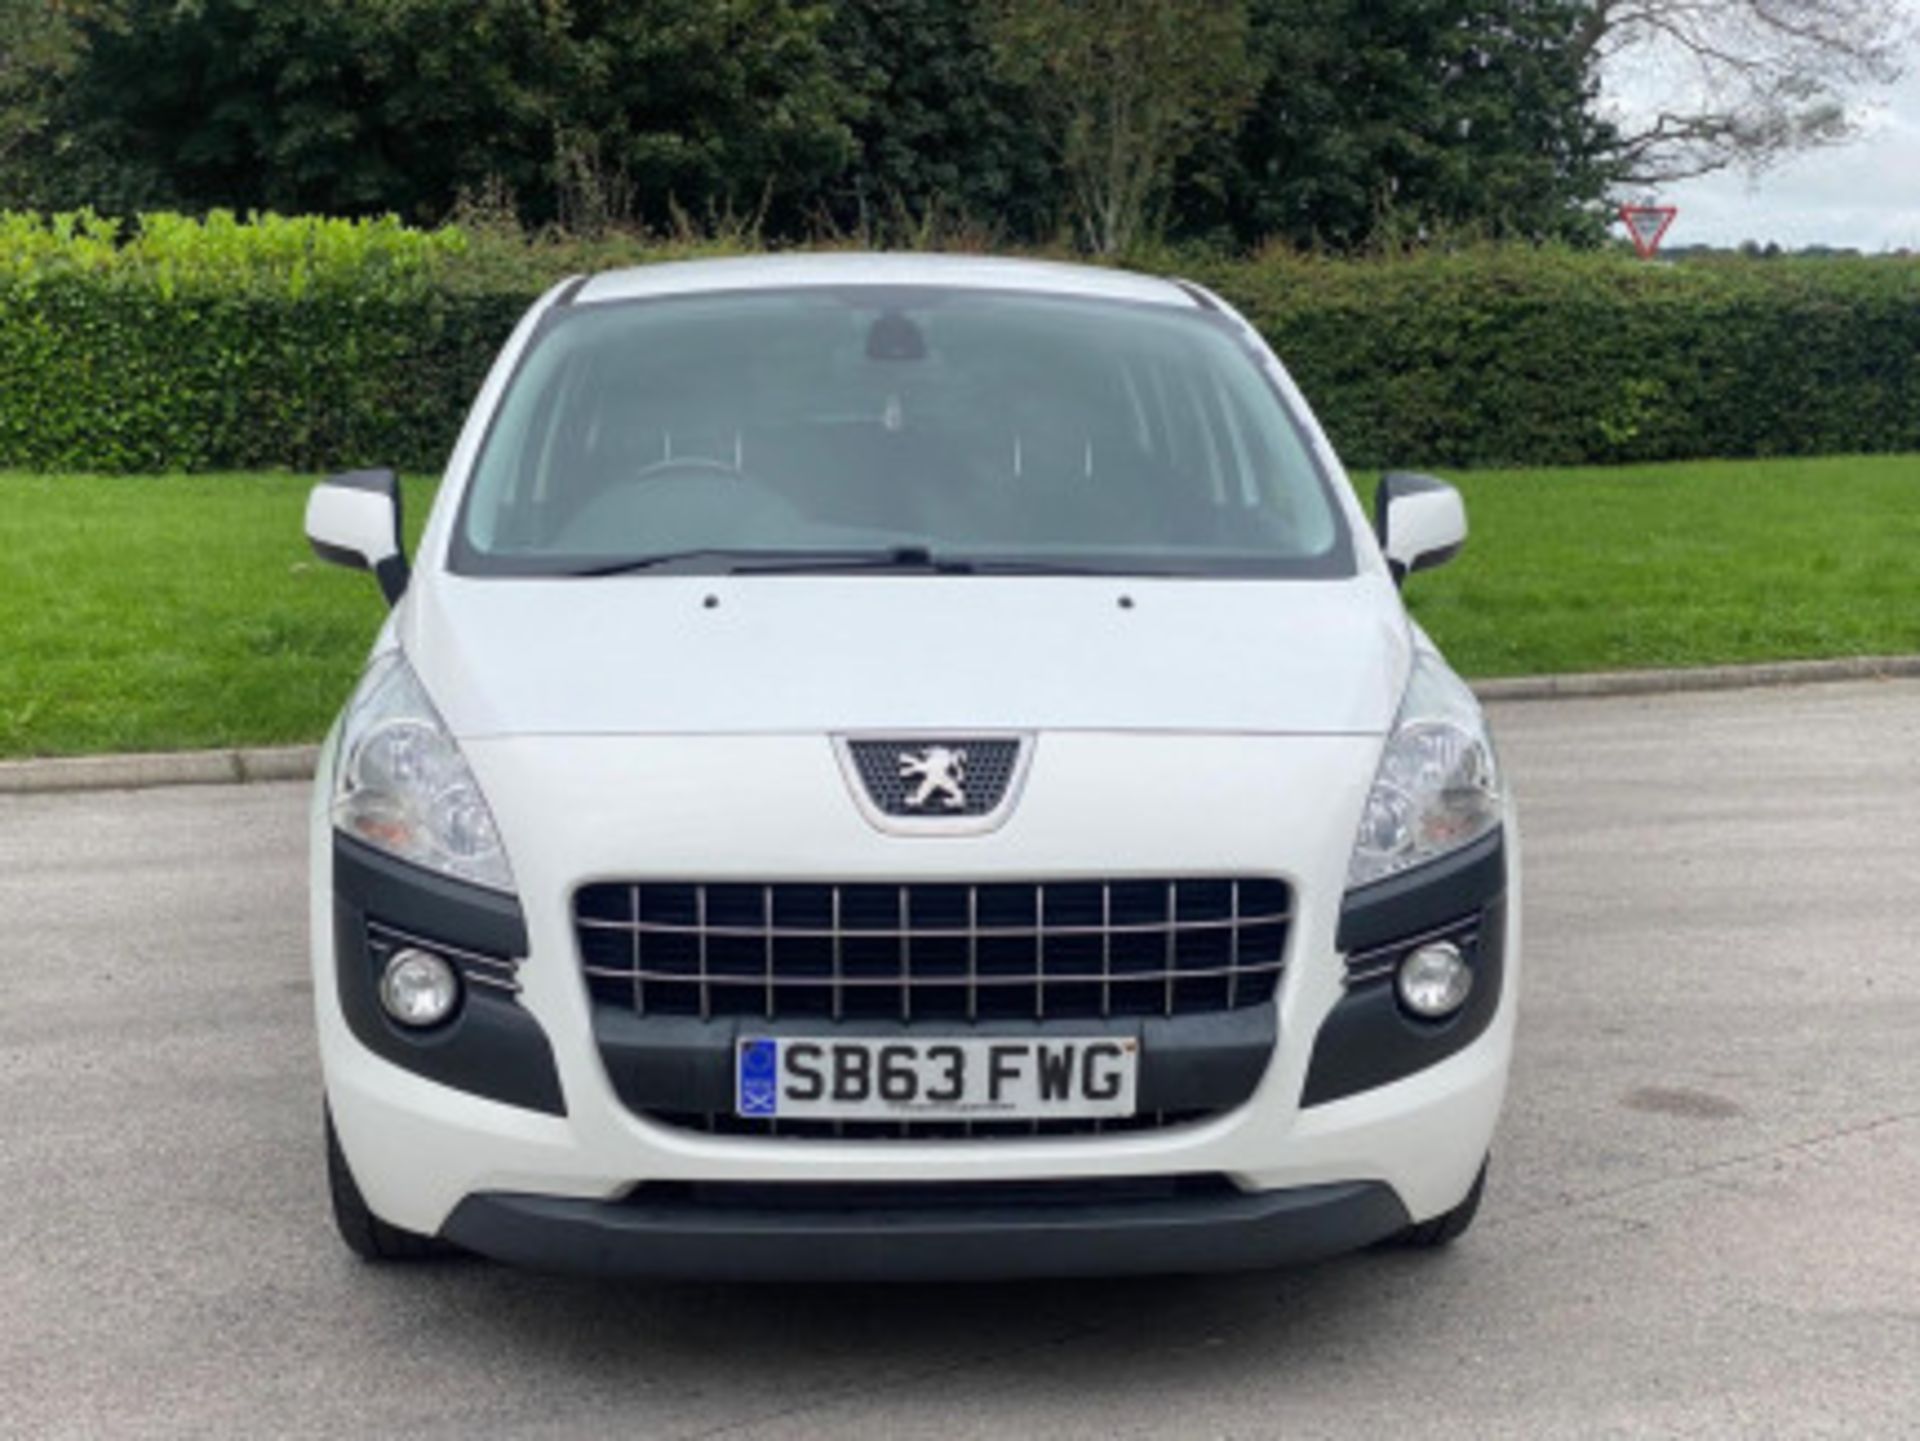 2013 PEUGEOT 3008 1.6 HDI ACTIVE EURO 5 5DR >>--NO VAT ON HAMMER--<< - Image 28 of 69